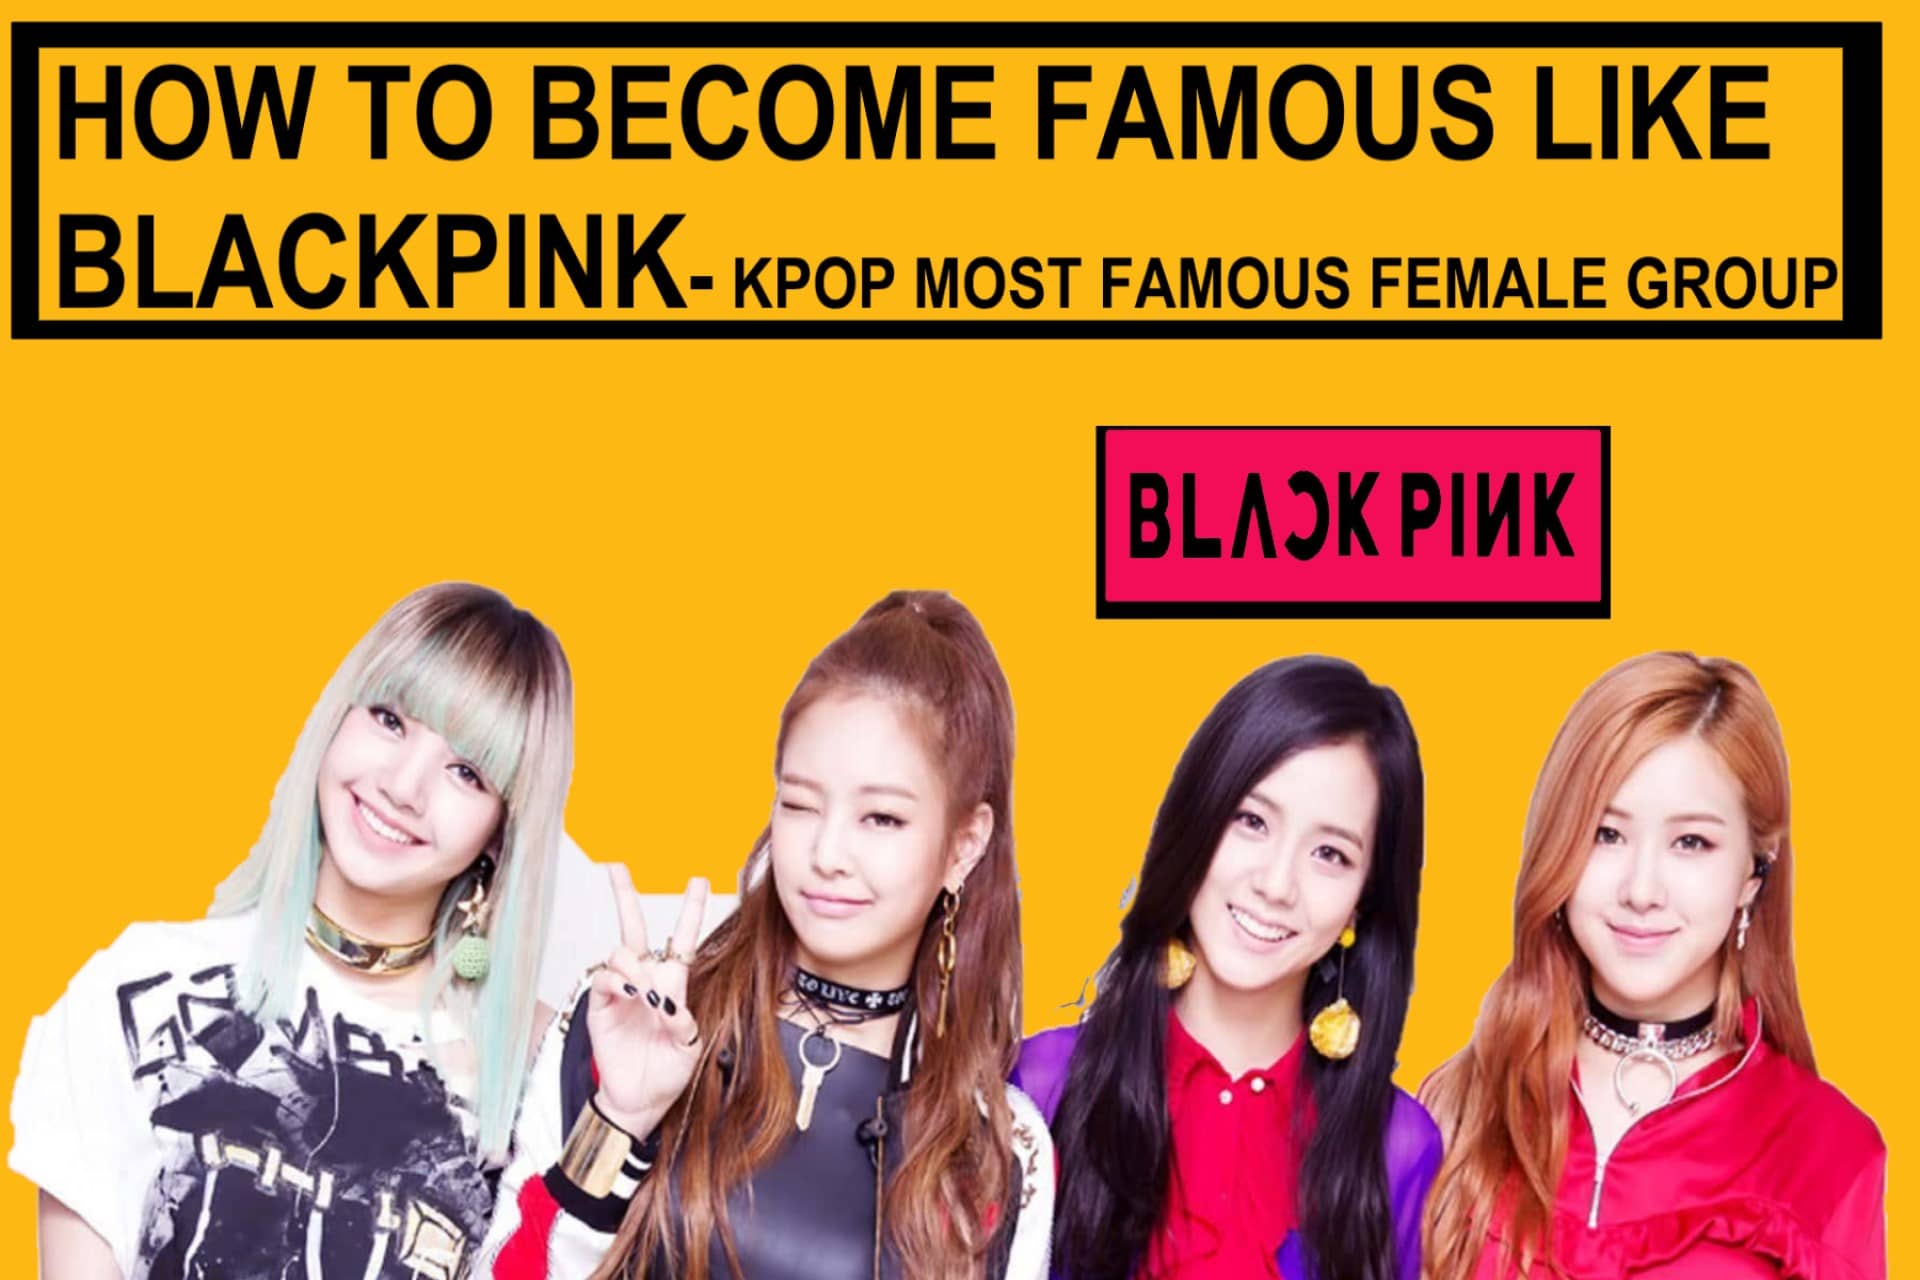 How To Become Famous Like BLACKPINK MARKETING STRATEGY EXAMPLE